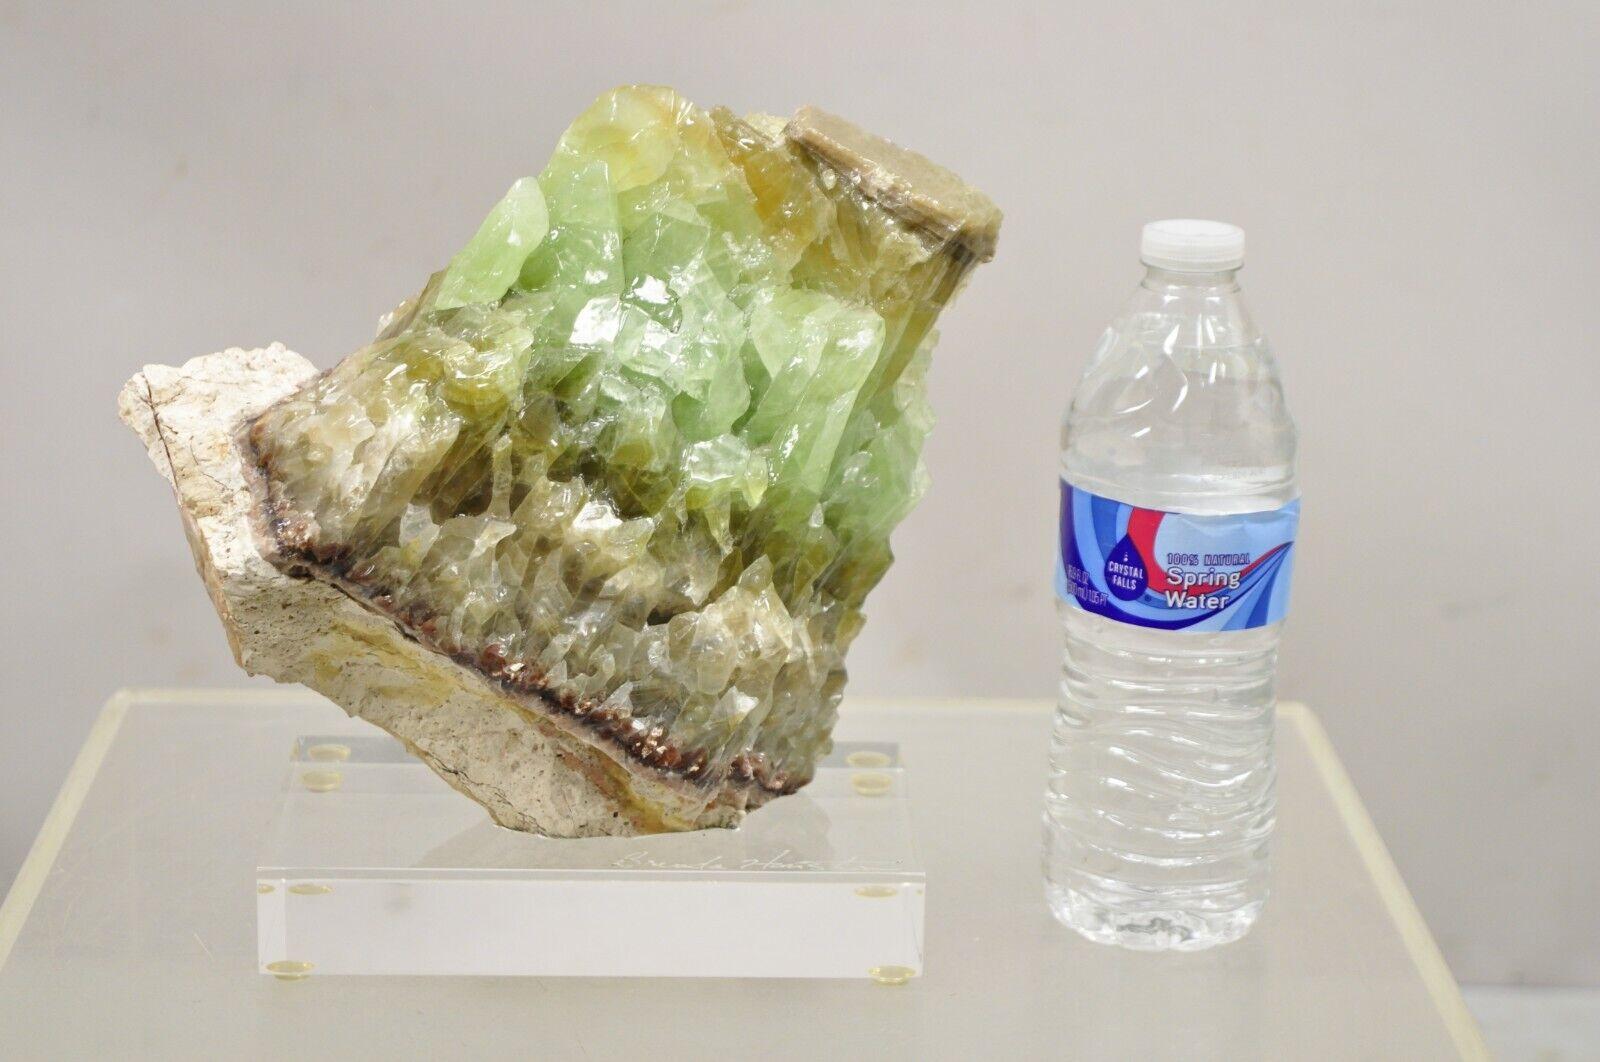 Large Green Calcite Quartz Mineral Geode Specimen Sculpture by Brenda Houston. Item features a remarkable green calcite quartz geode sculpture on clear acrylic/lucite base, artist signed 